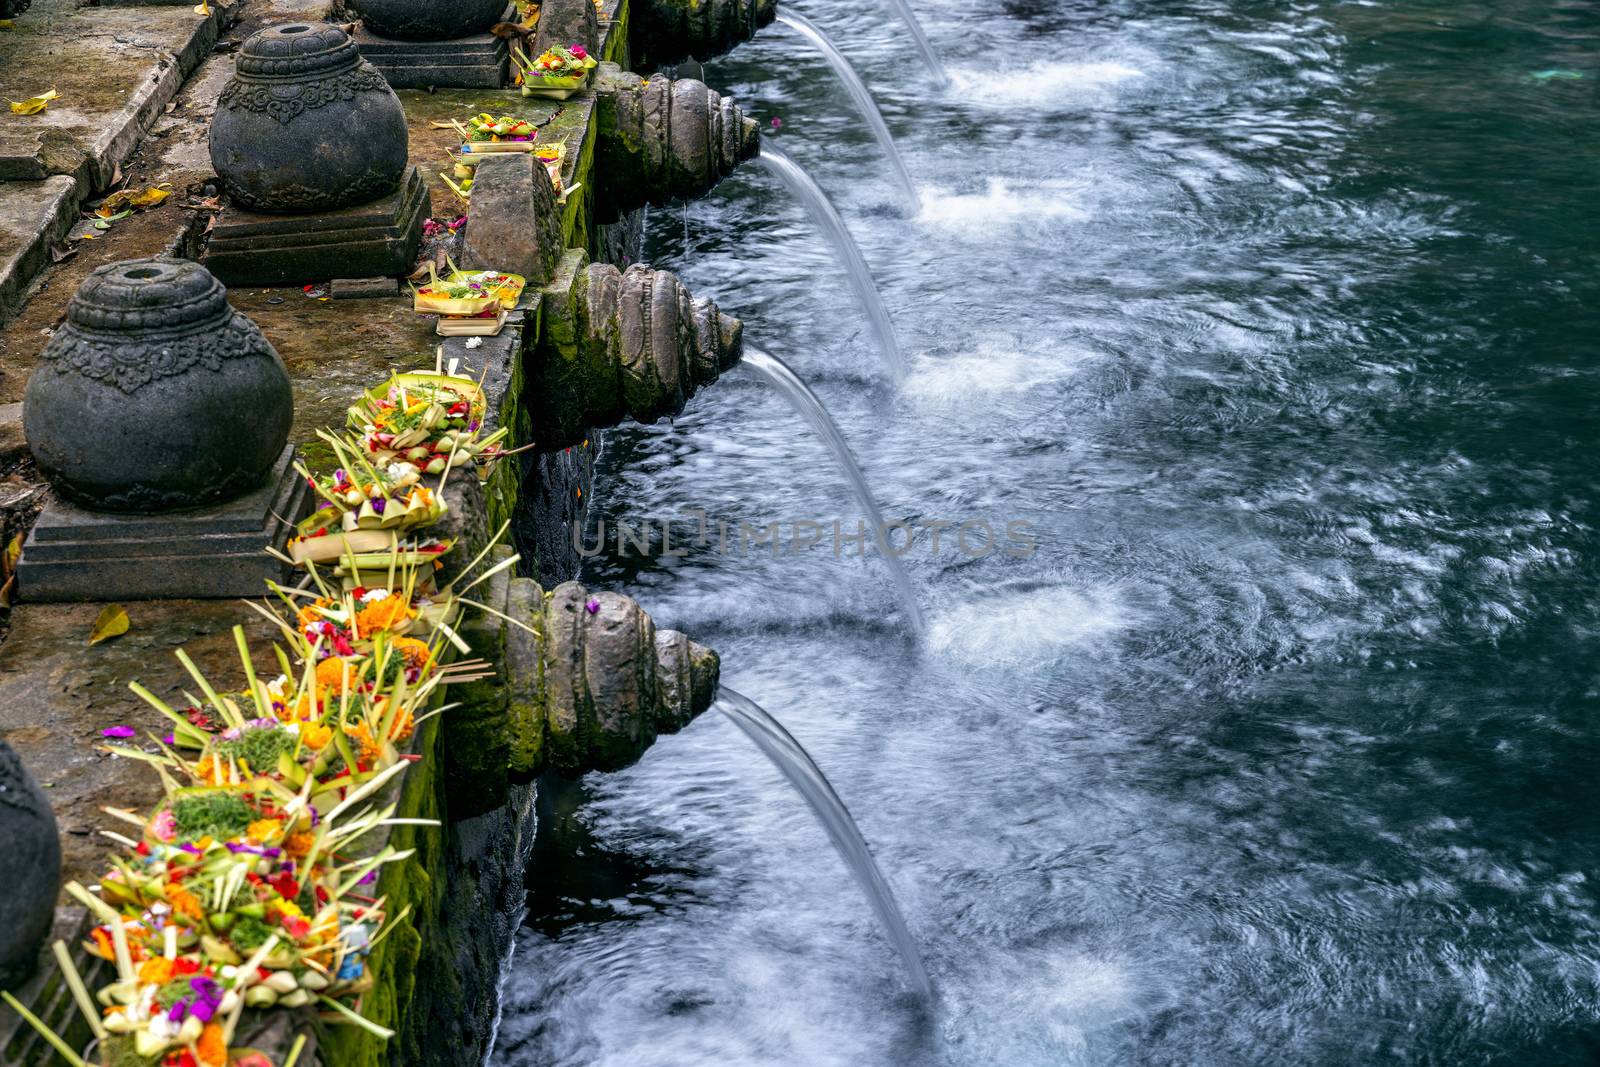 Holy spring water temple, Tirta empul temple in Bali, Indonesia.